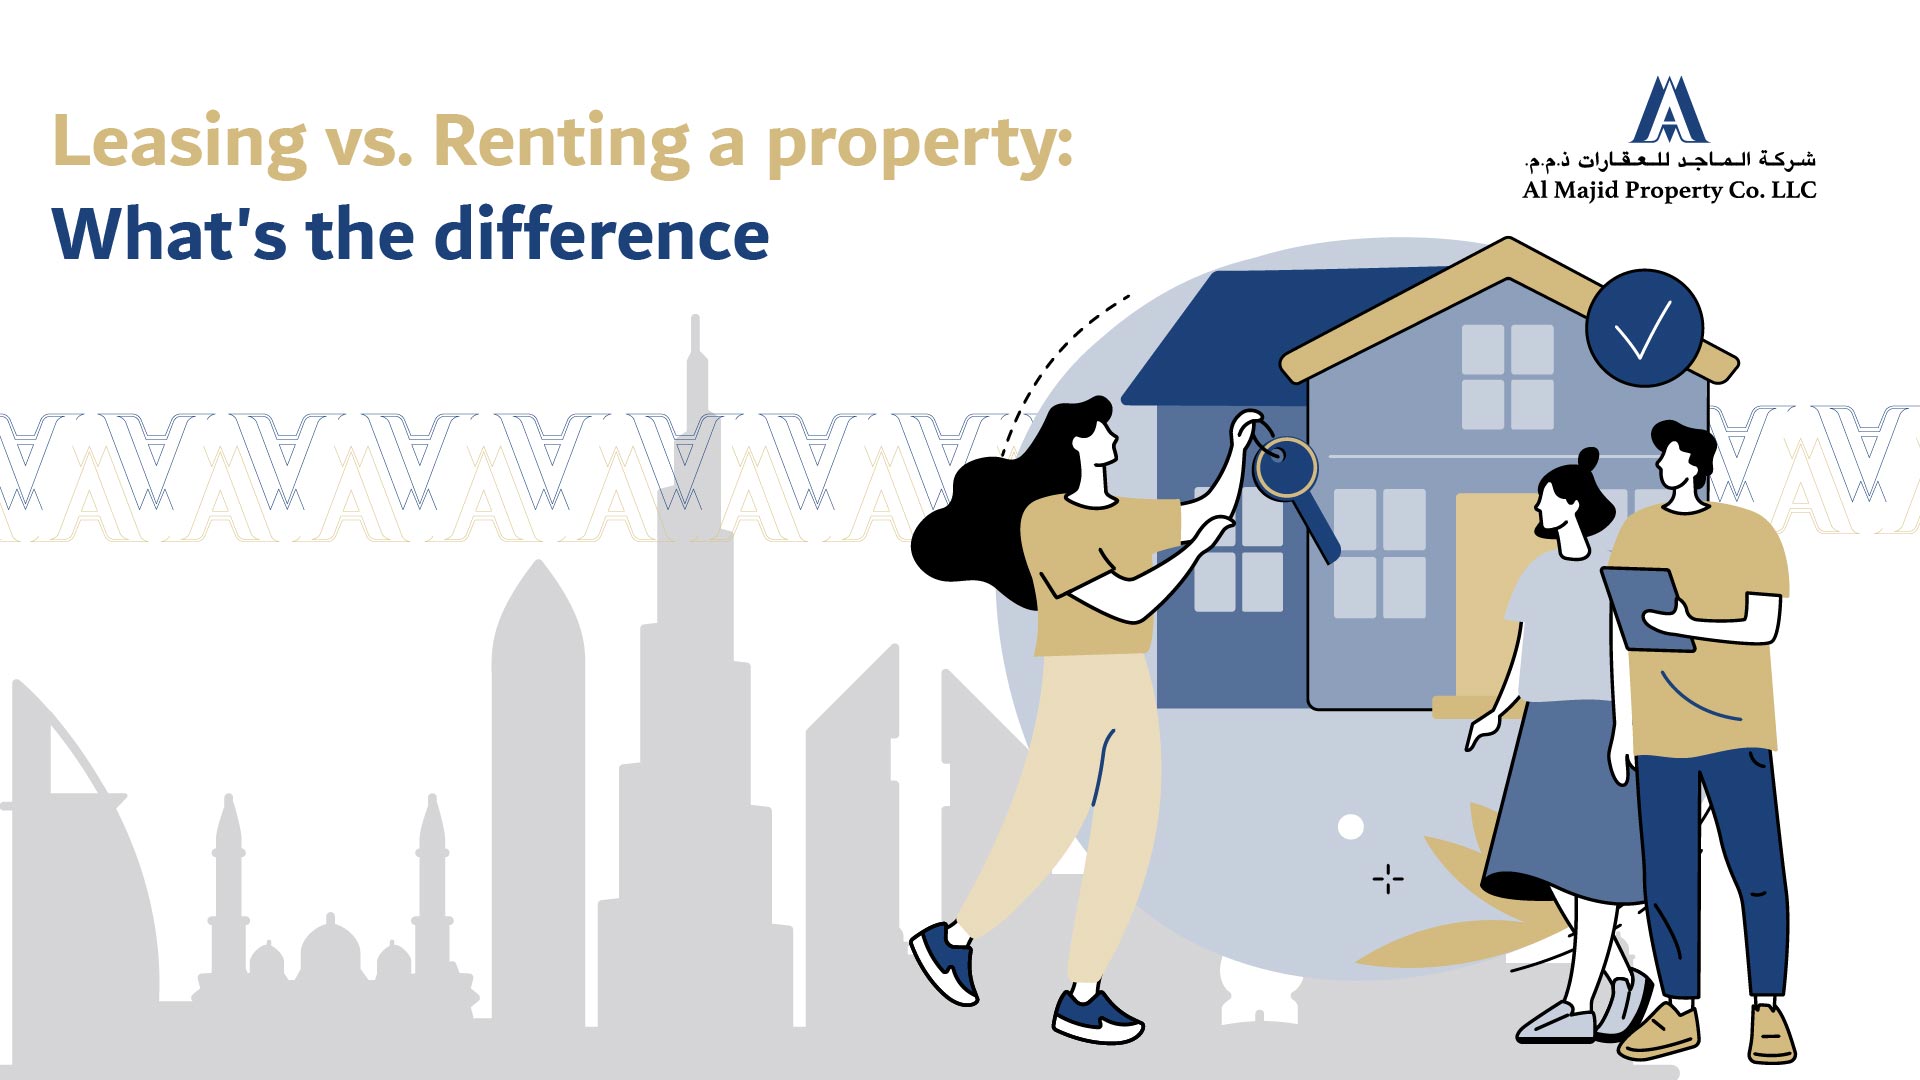 Leasing vs. Renting a property